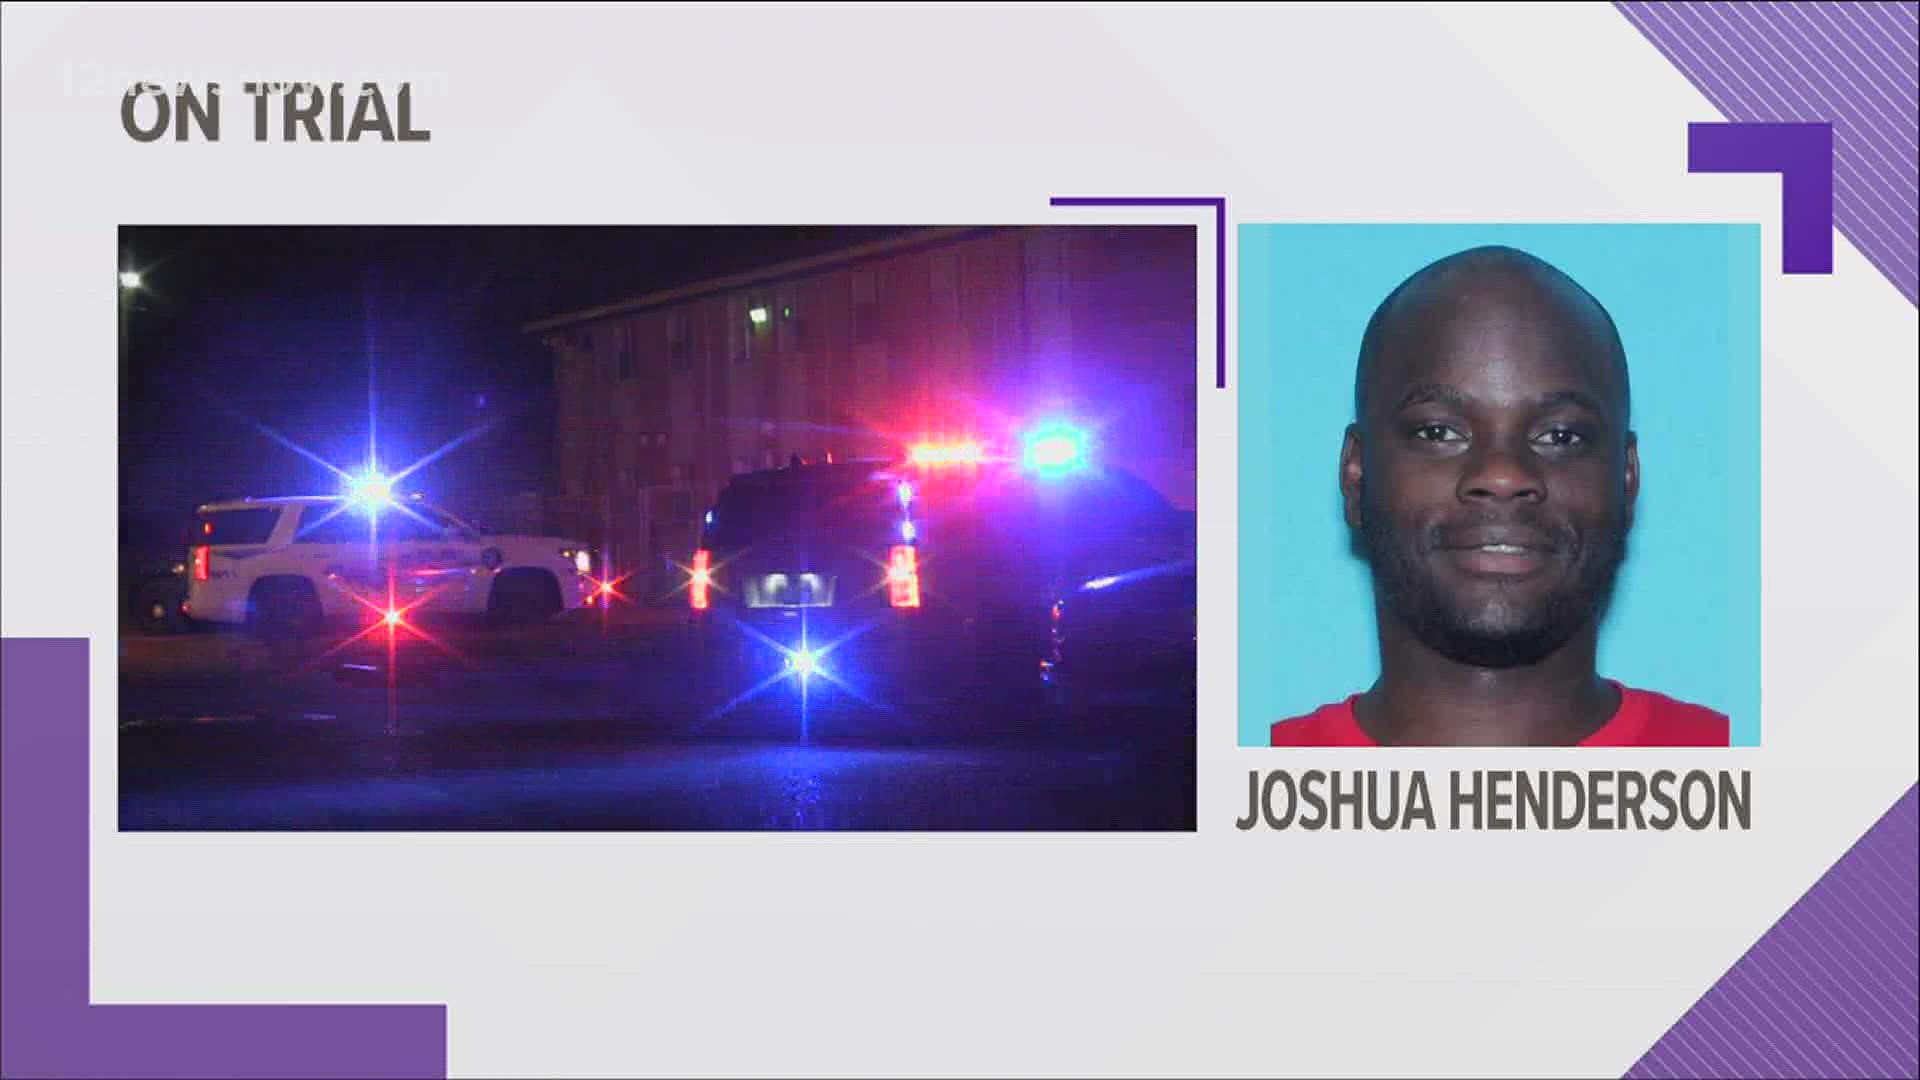 The jury could not reach a unanimous decision in Joshua Henderson's murder trial in July 2021.